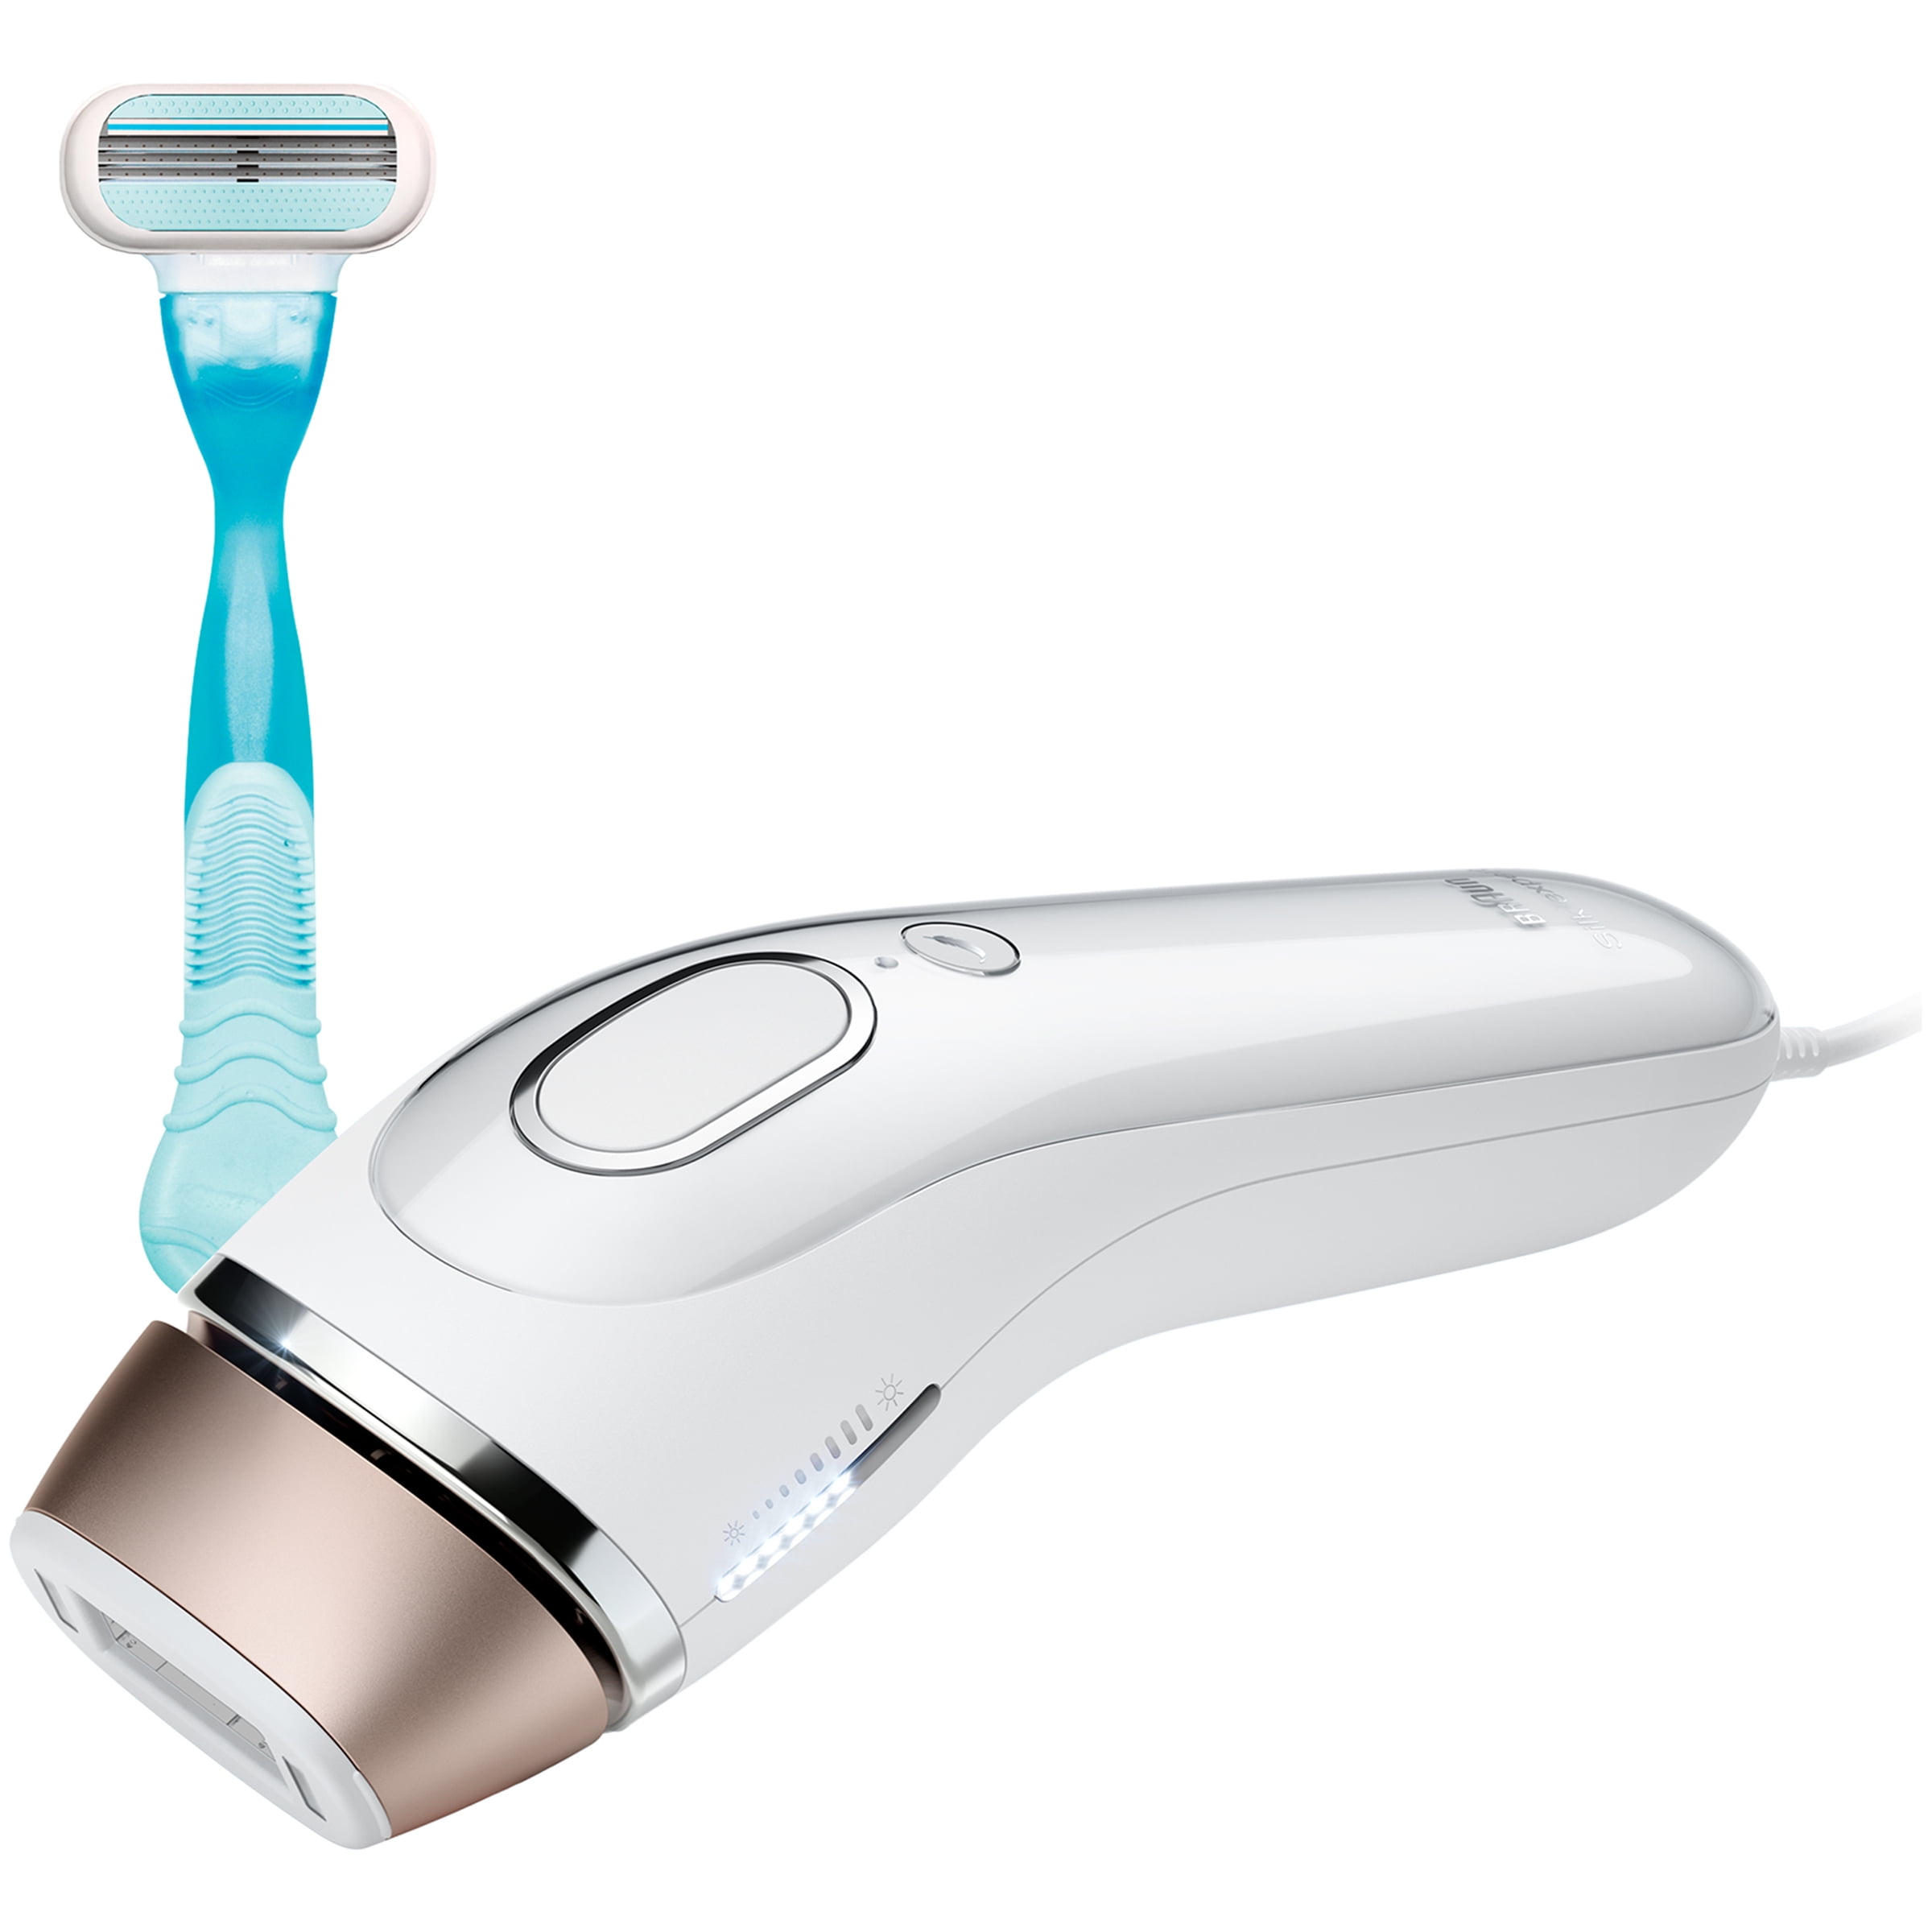 Braun Silk expert Pro 5 IPL Hair Removal System, PL5137 with Venus Swirl  Razor, FDA Cleared - White and Gold